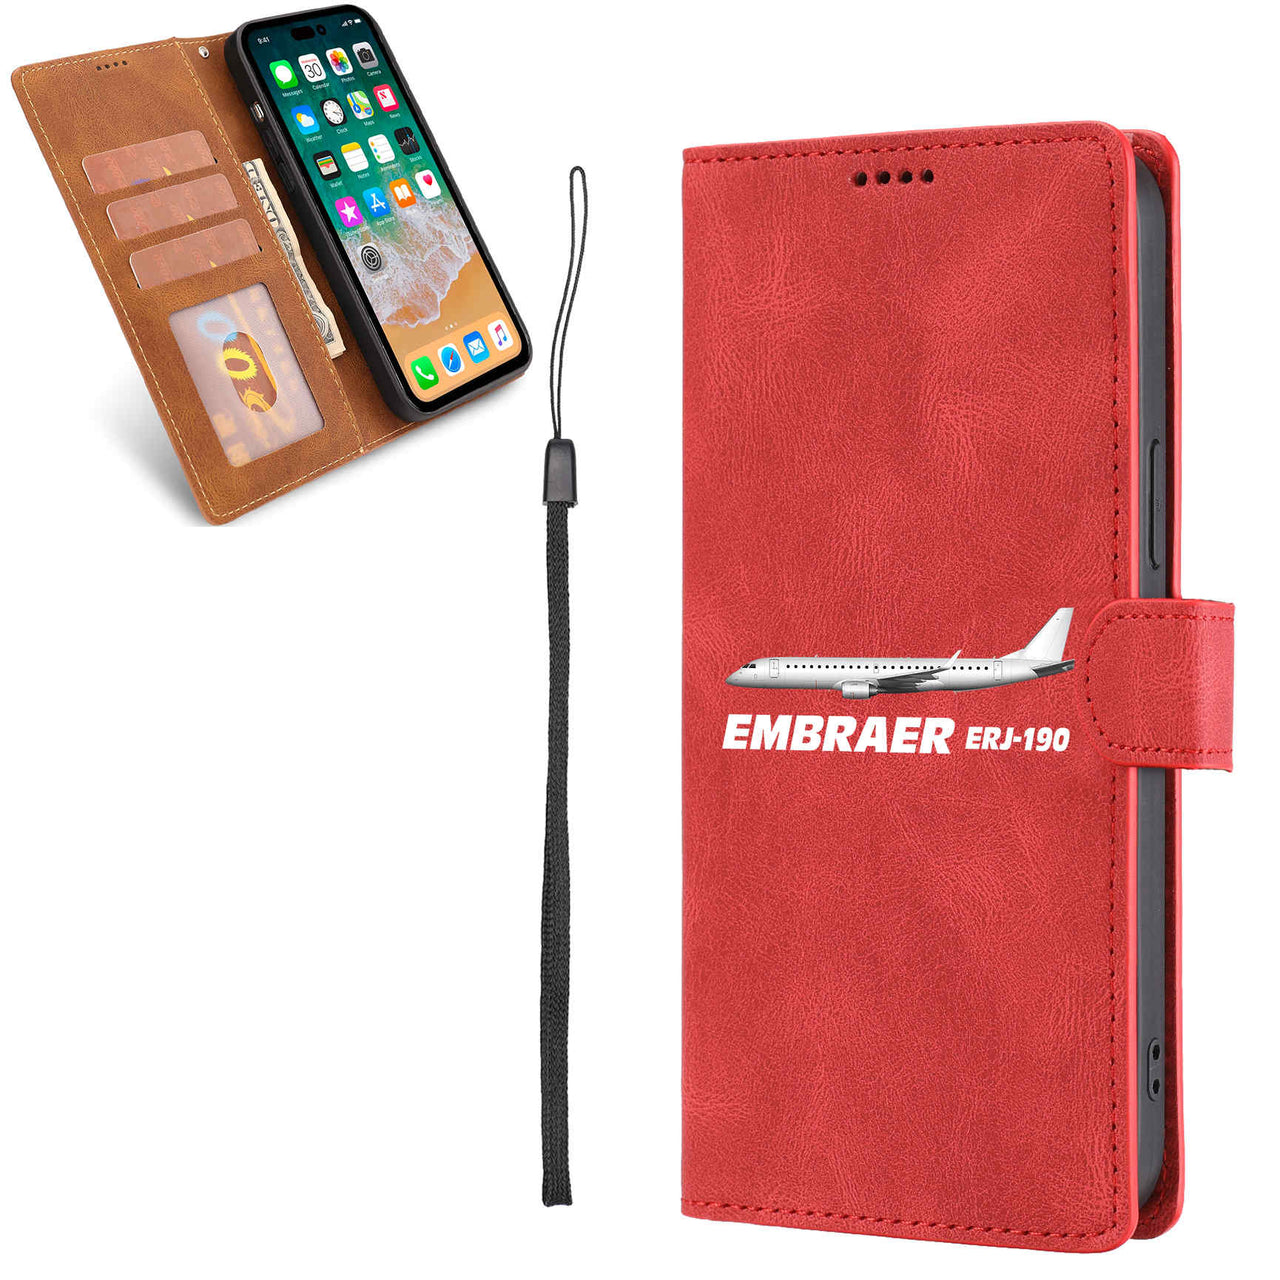 The Embraer ERJ-190 Leather Samsung A Cases